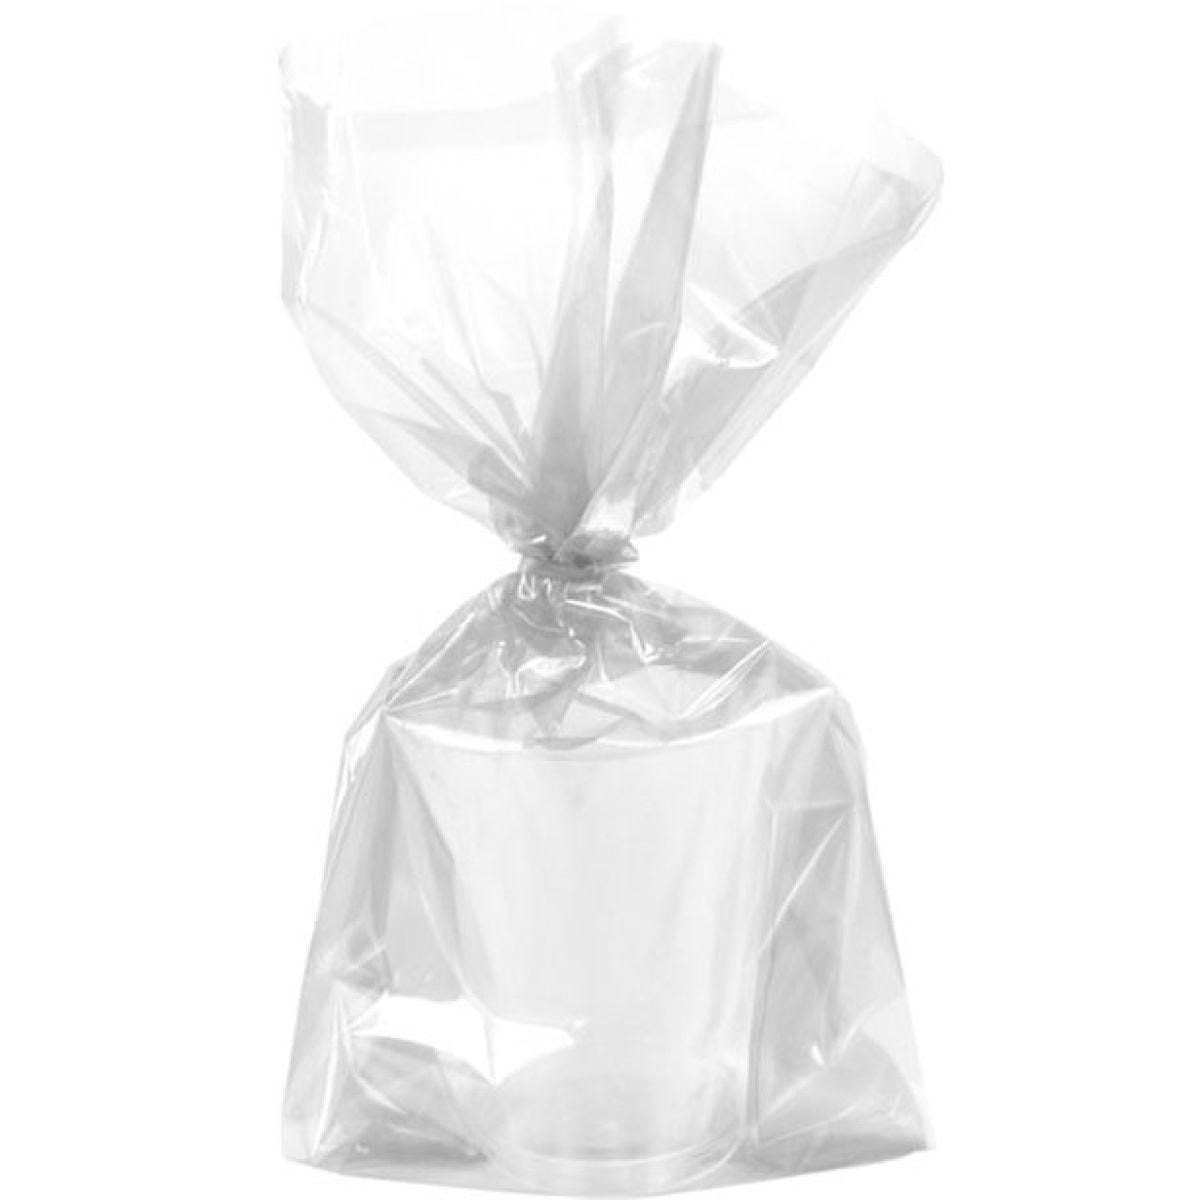 Cellophane Bags 9x12, 200Pcs Clear Bags for Gifts Cello Bags with Twist  Ties Cellophane Treat Goodie Bags for Party Wedding Birthday Gift Wrapping